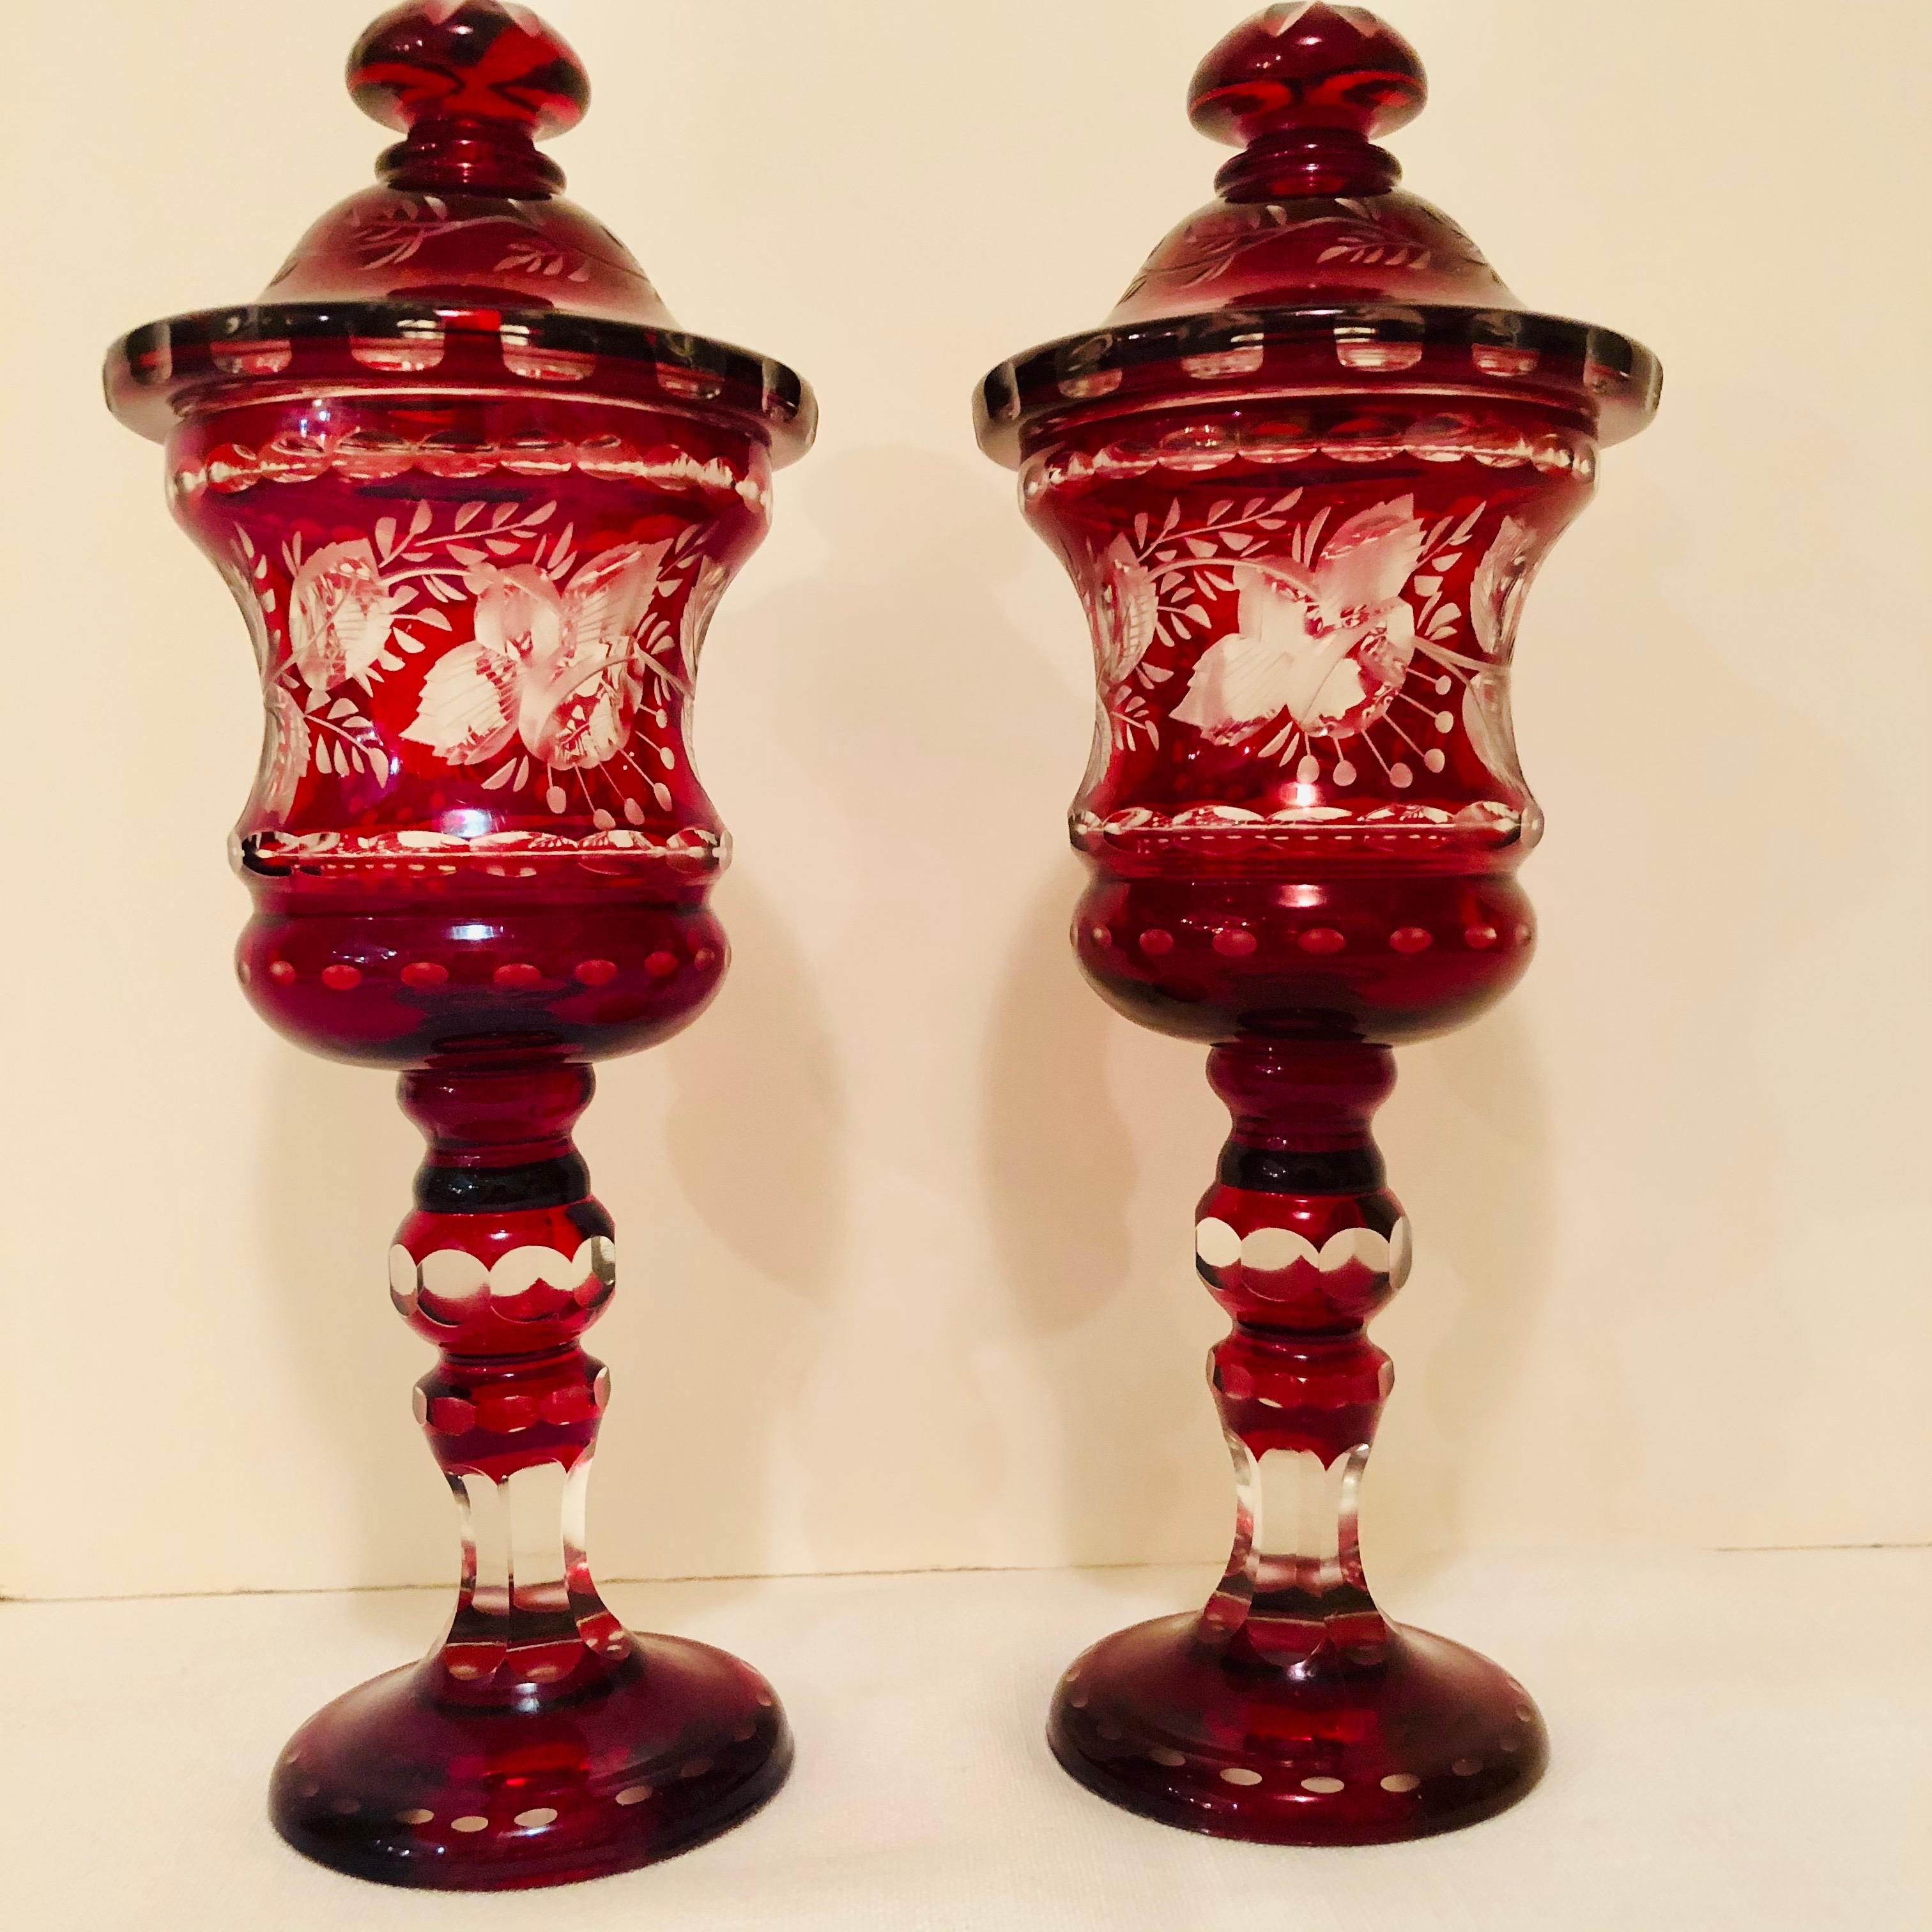 Czech Pair of Bohemian Covered Vases with Wheel Cut Decoration of Flowers and Leaves